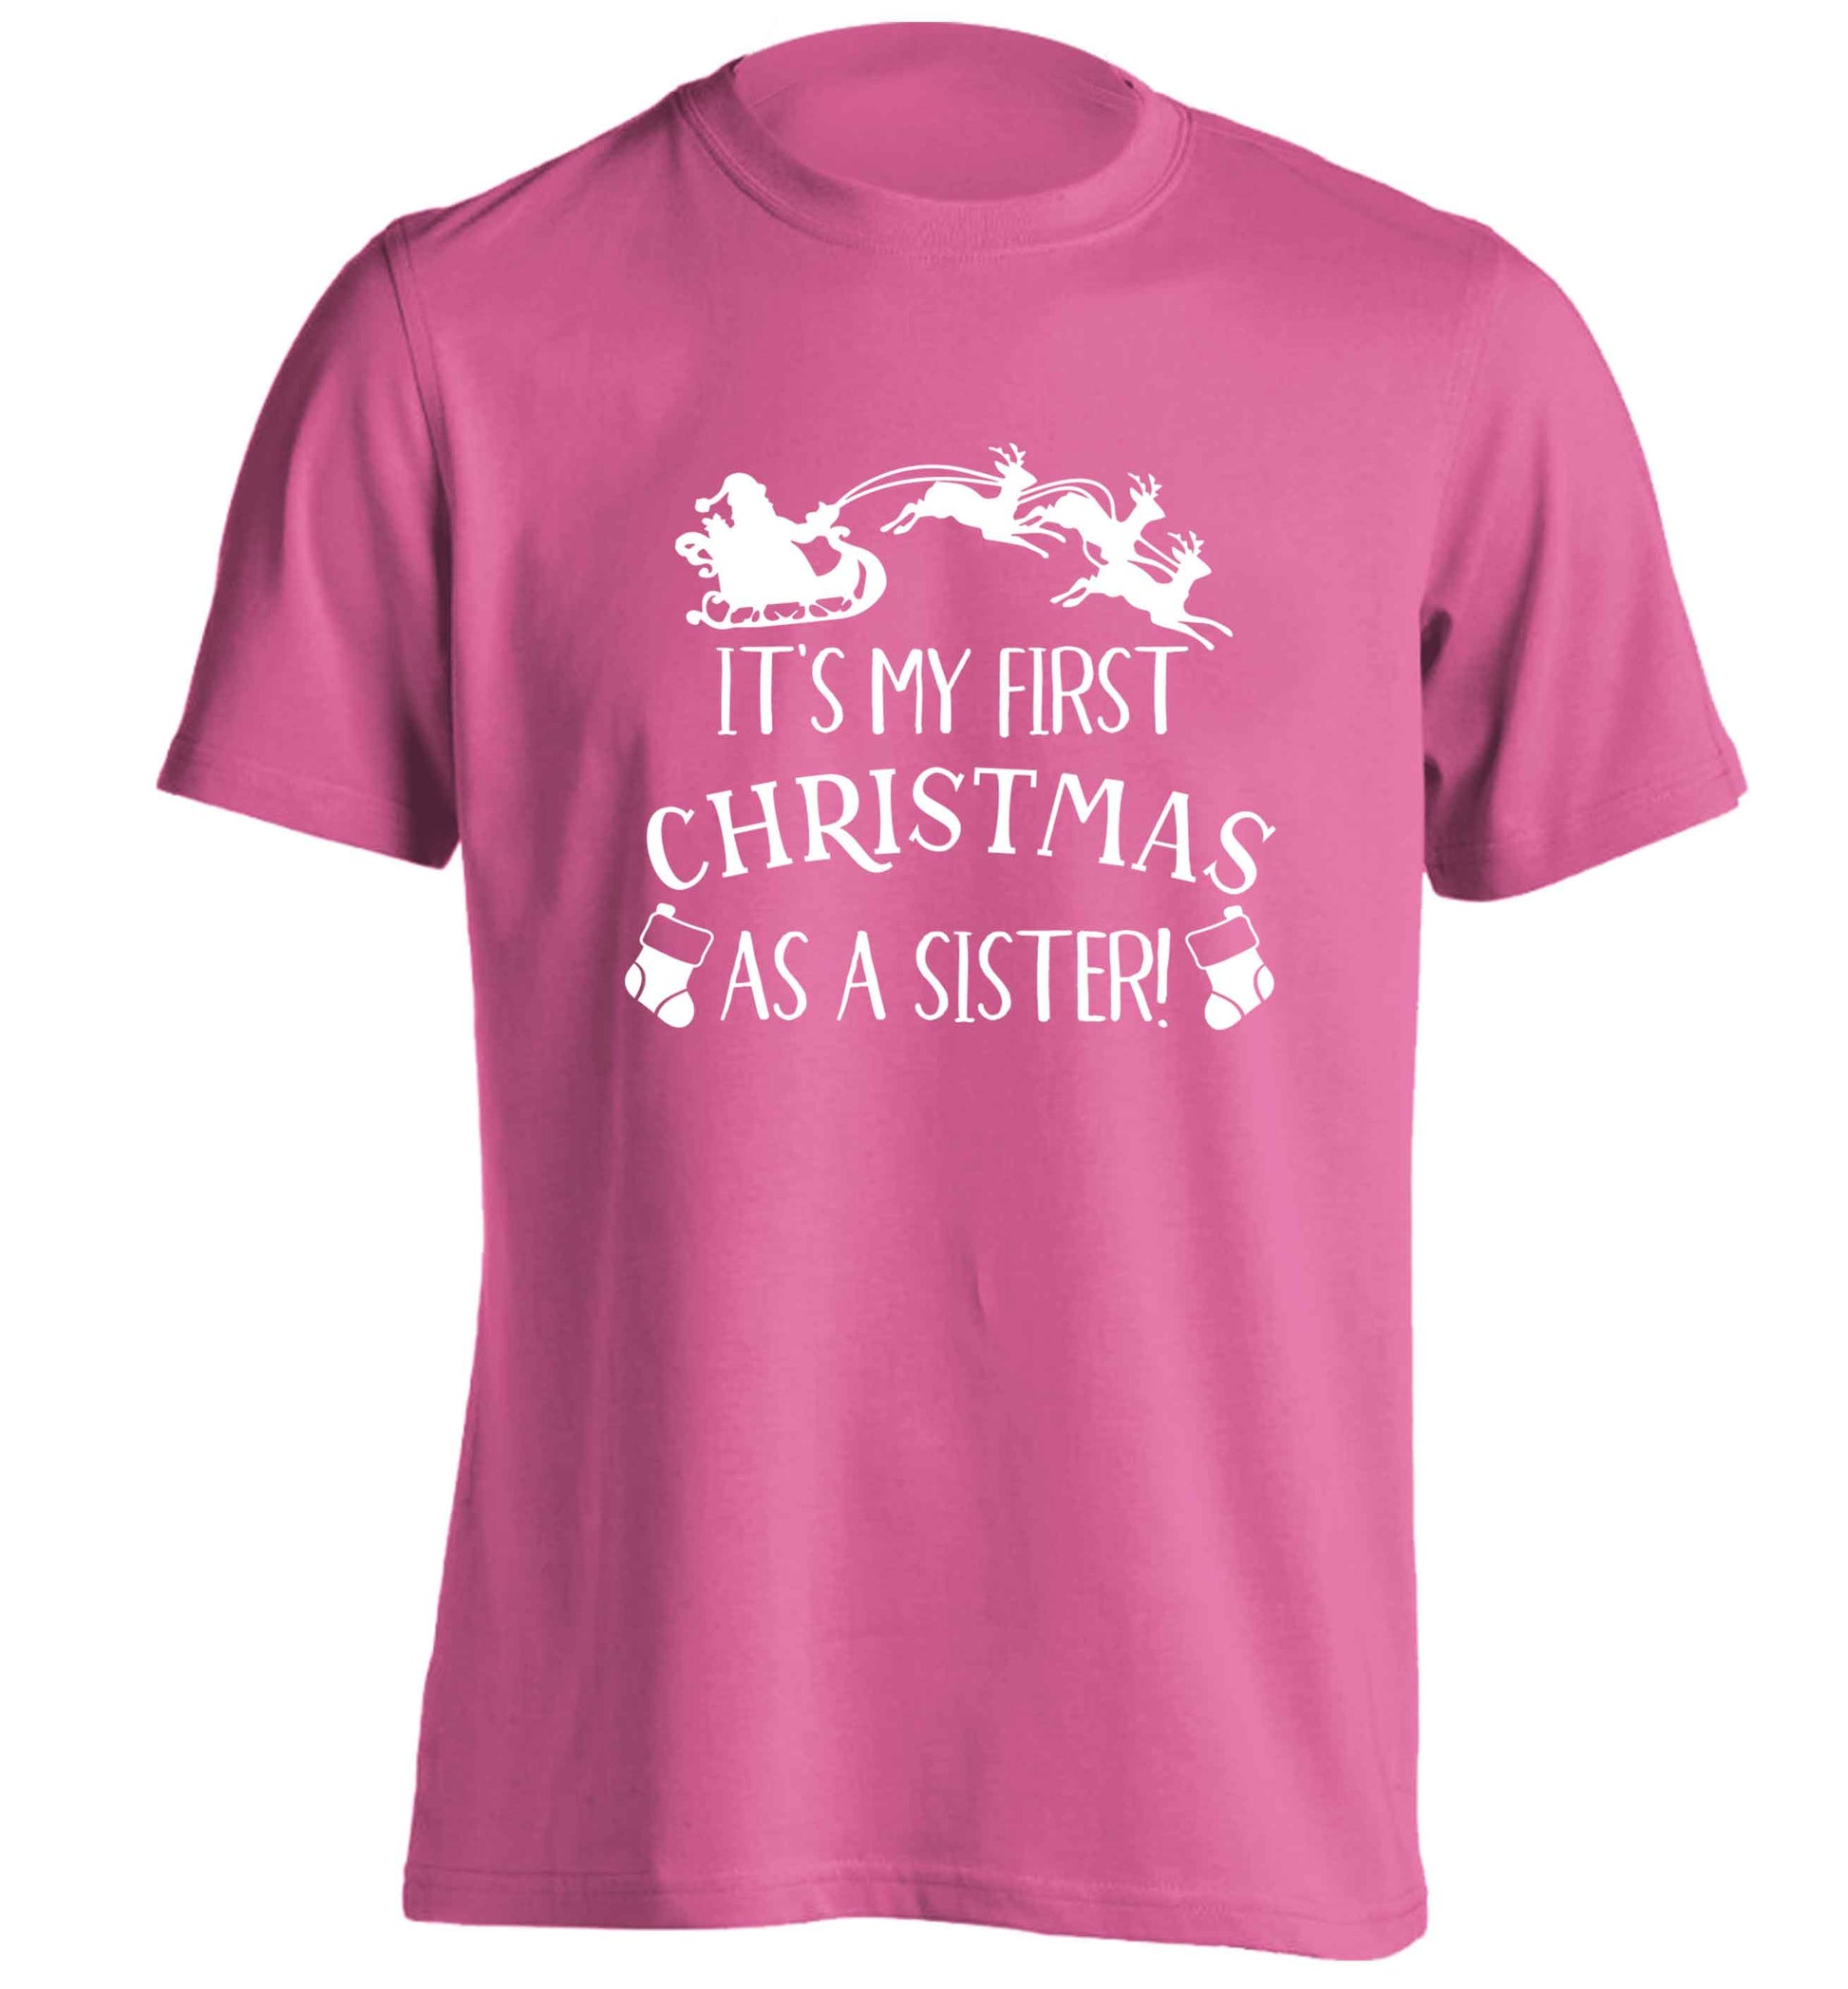 It's my first Christmas as a sister! adults unisex pink Tshirt 2XL